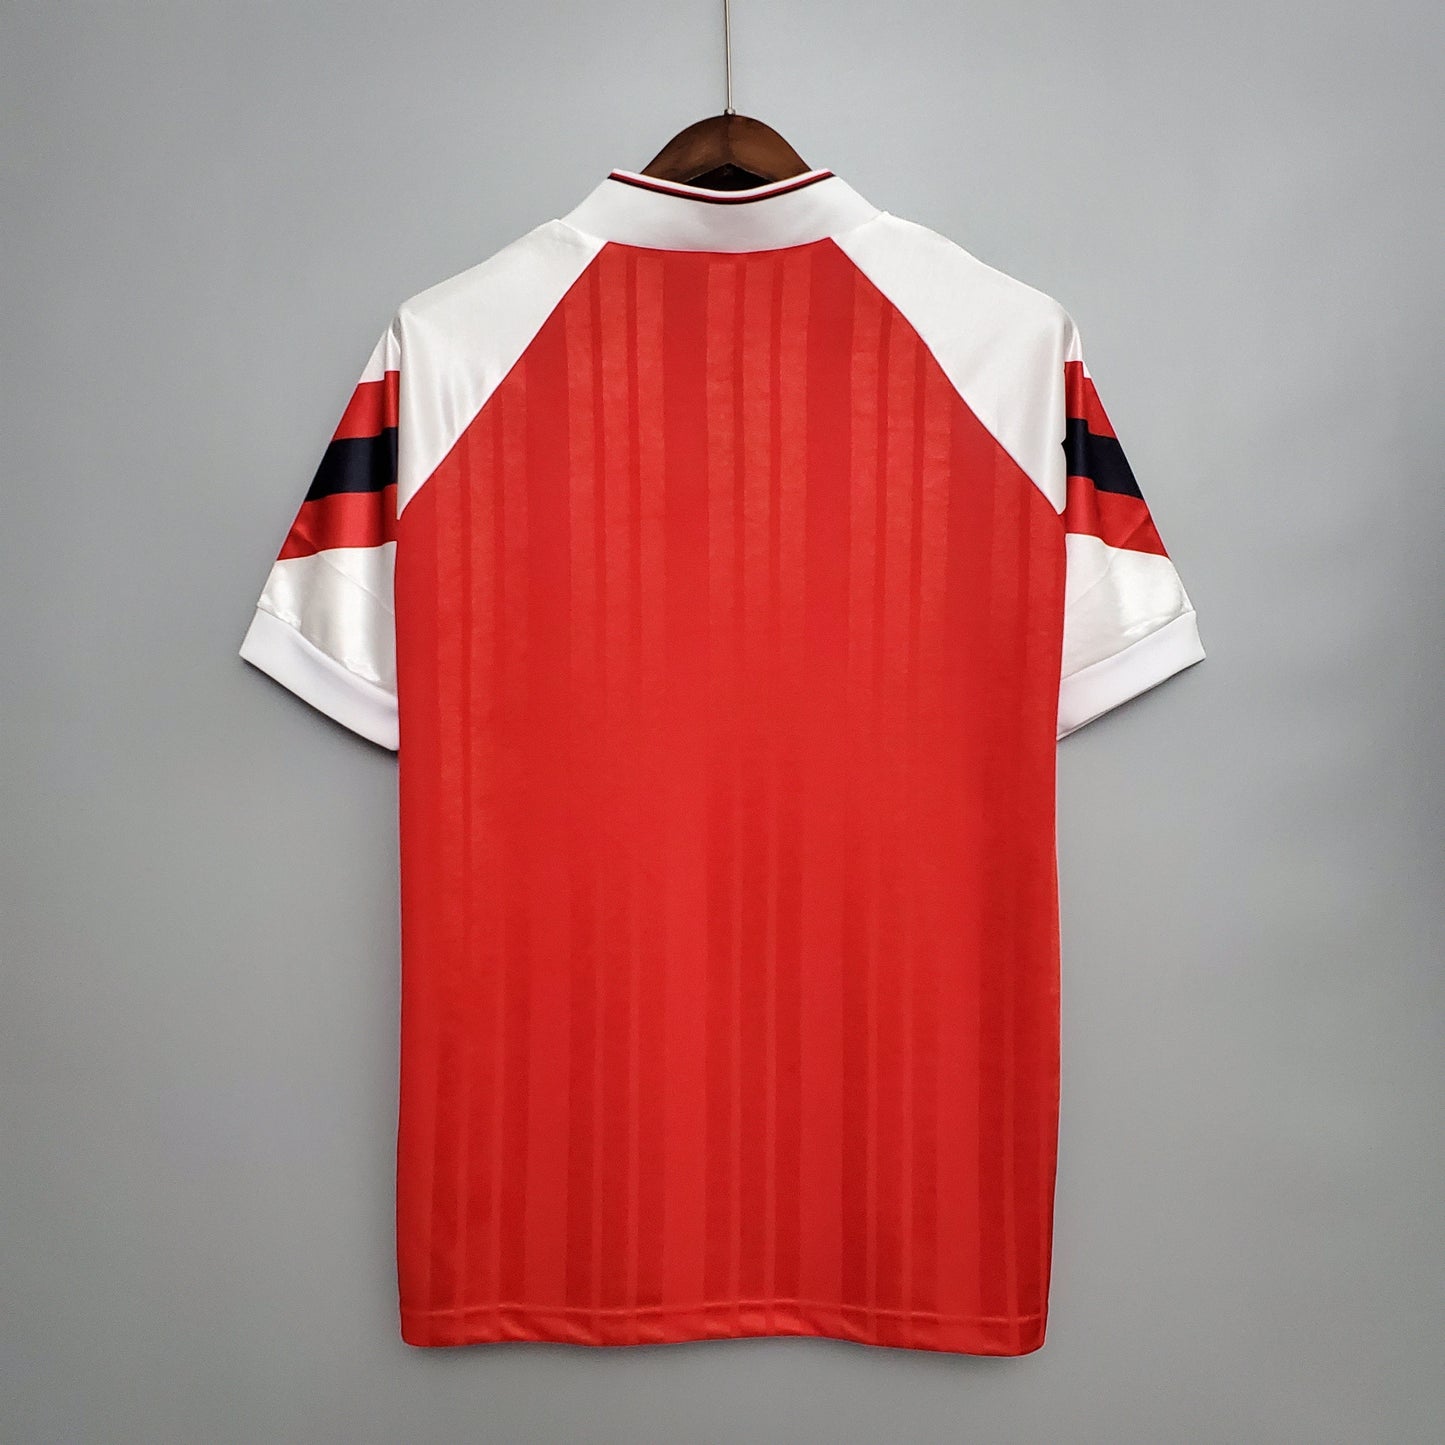 ARSENAL 1992 - 1993 HOME JERSEY